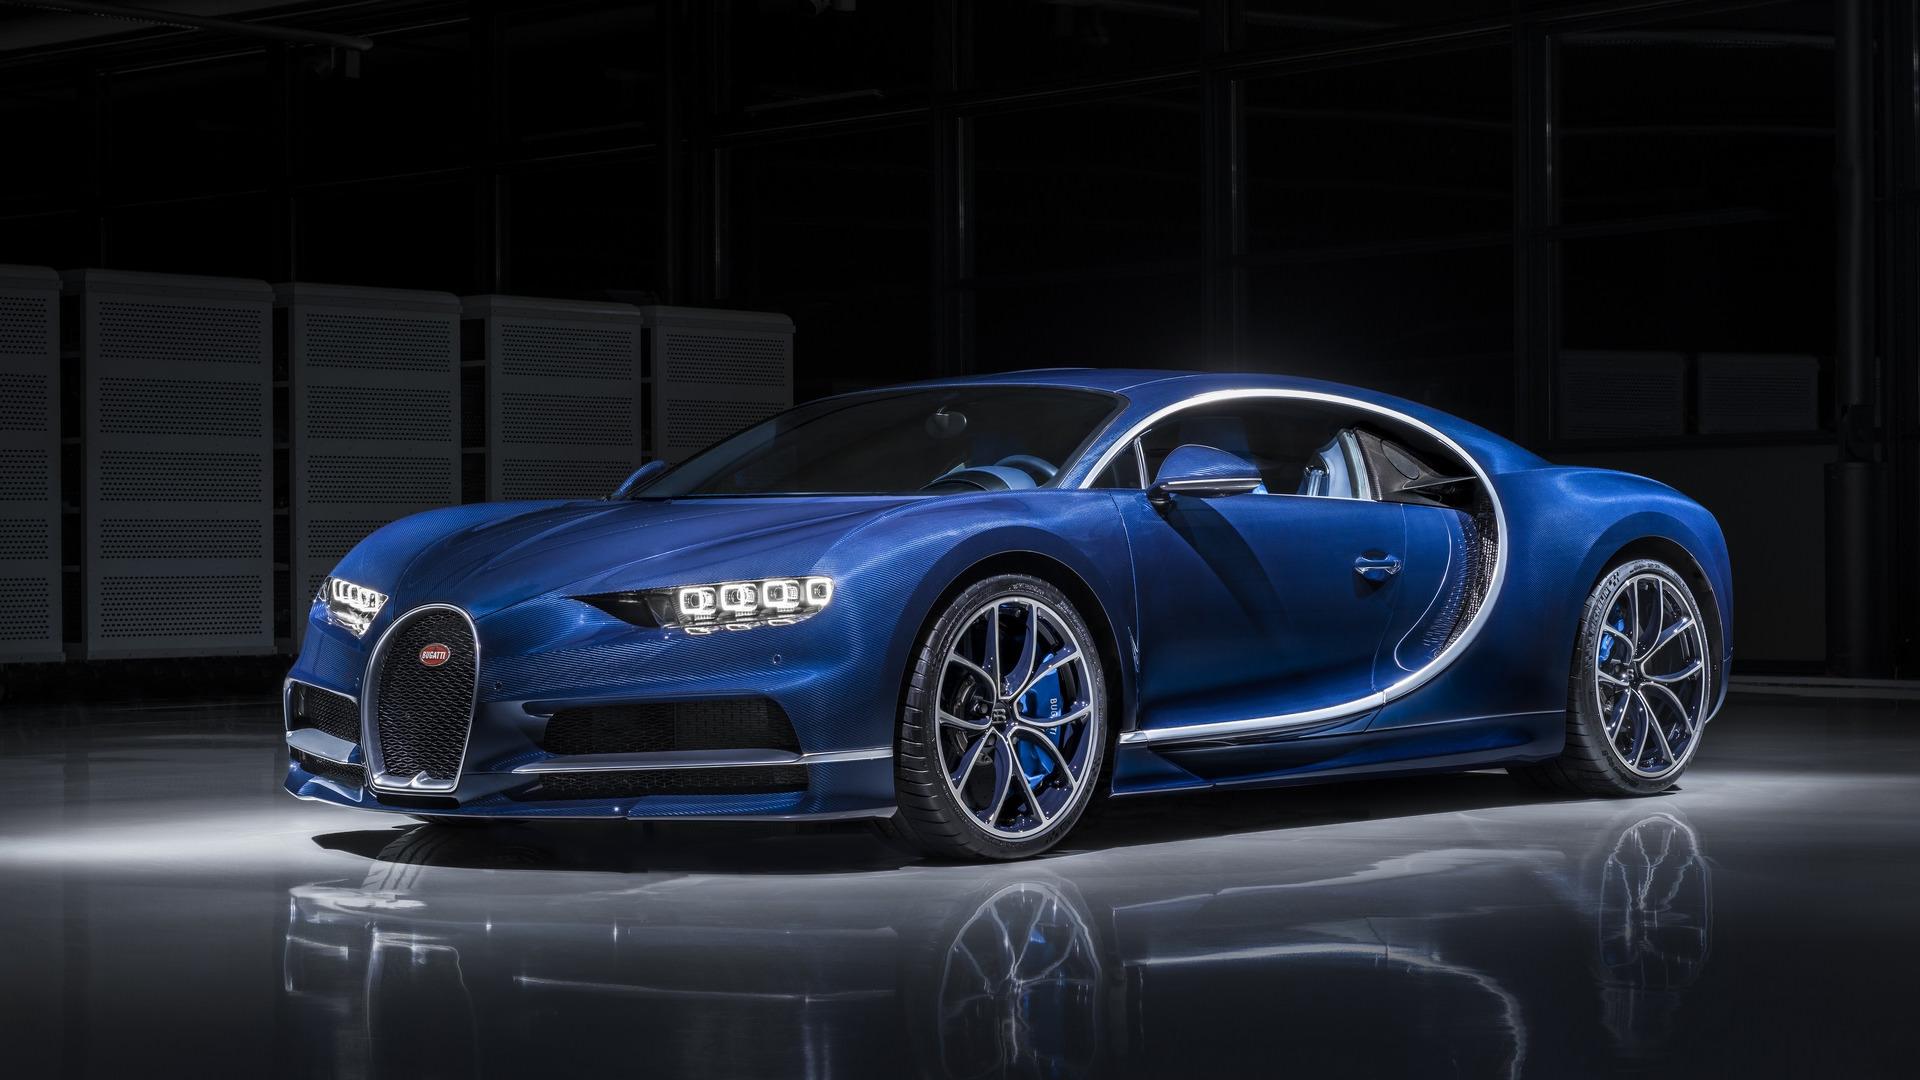 Bugatti Chiron in 'Bleu Royal' exposed carbon fibre will be at